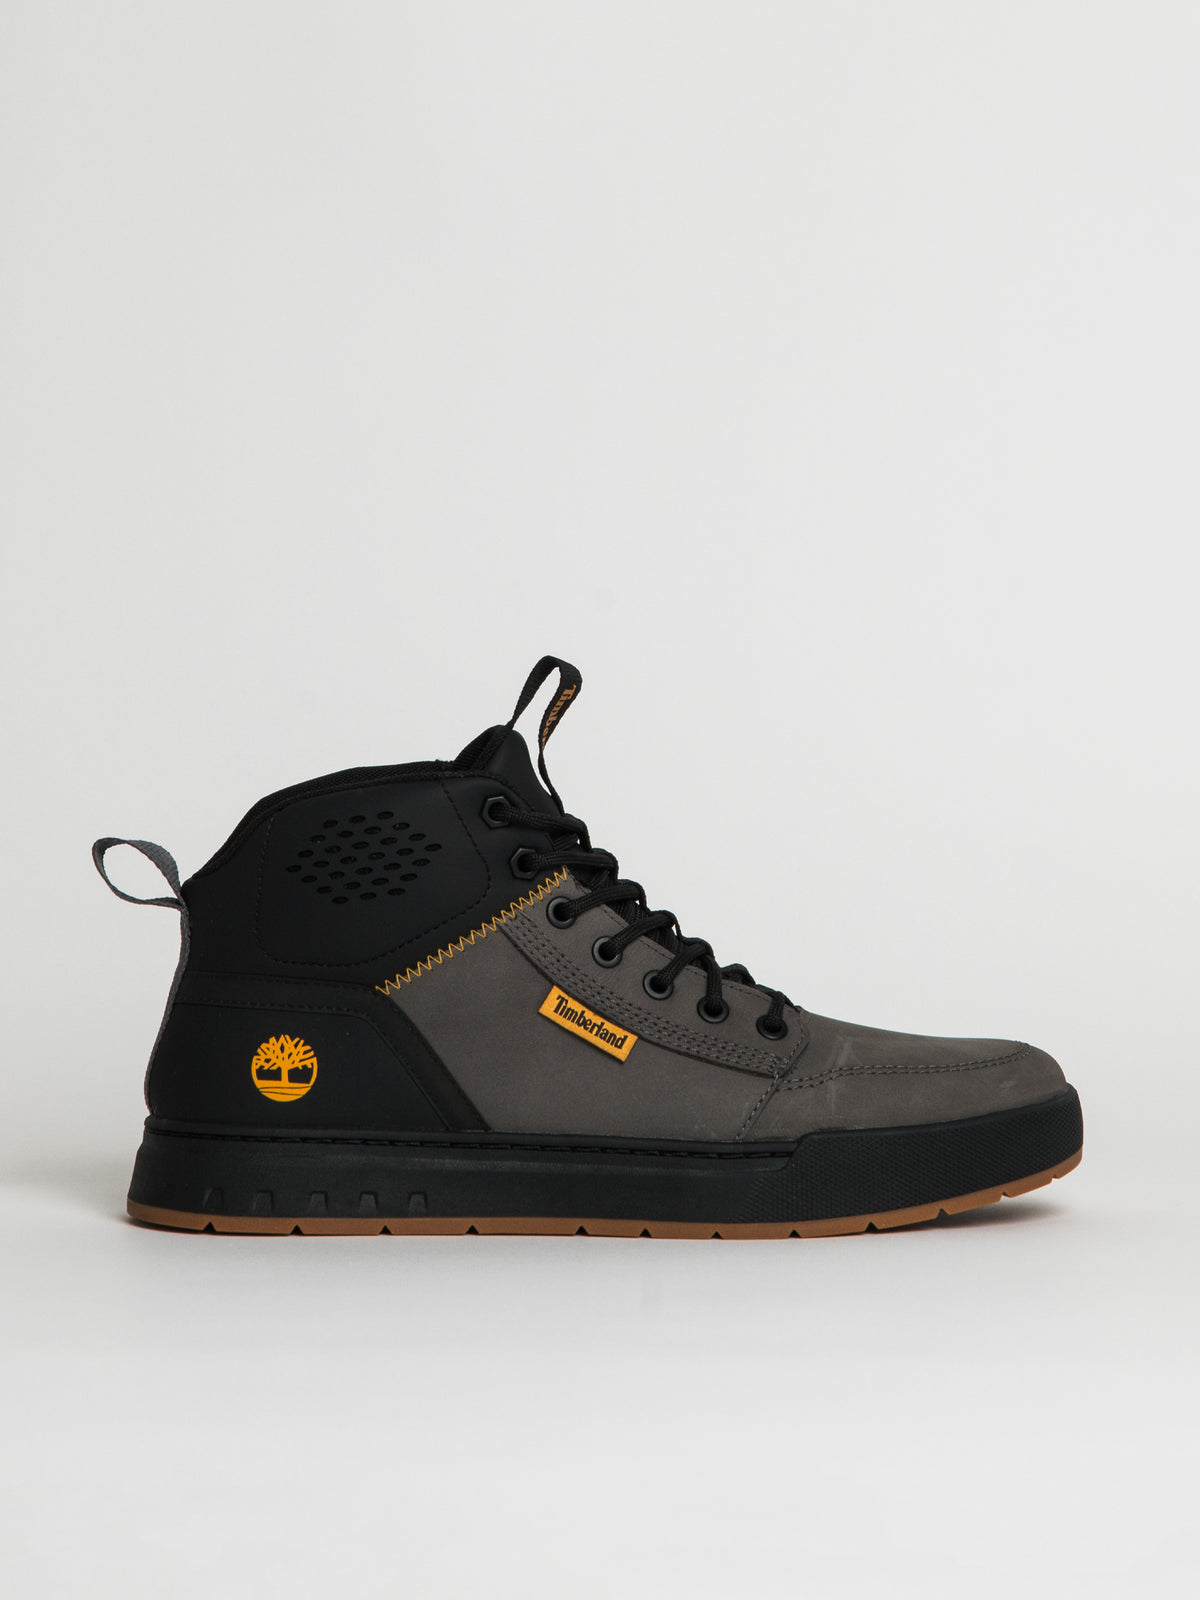 MENS MAPLE | TIMBERLAND Collective BOOT Footwear GROVE Boathouse MID SPORT